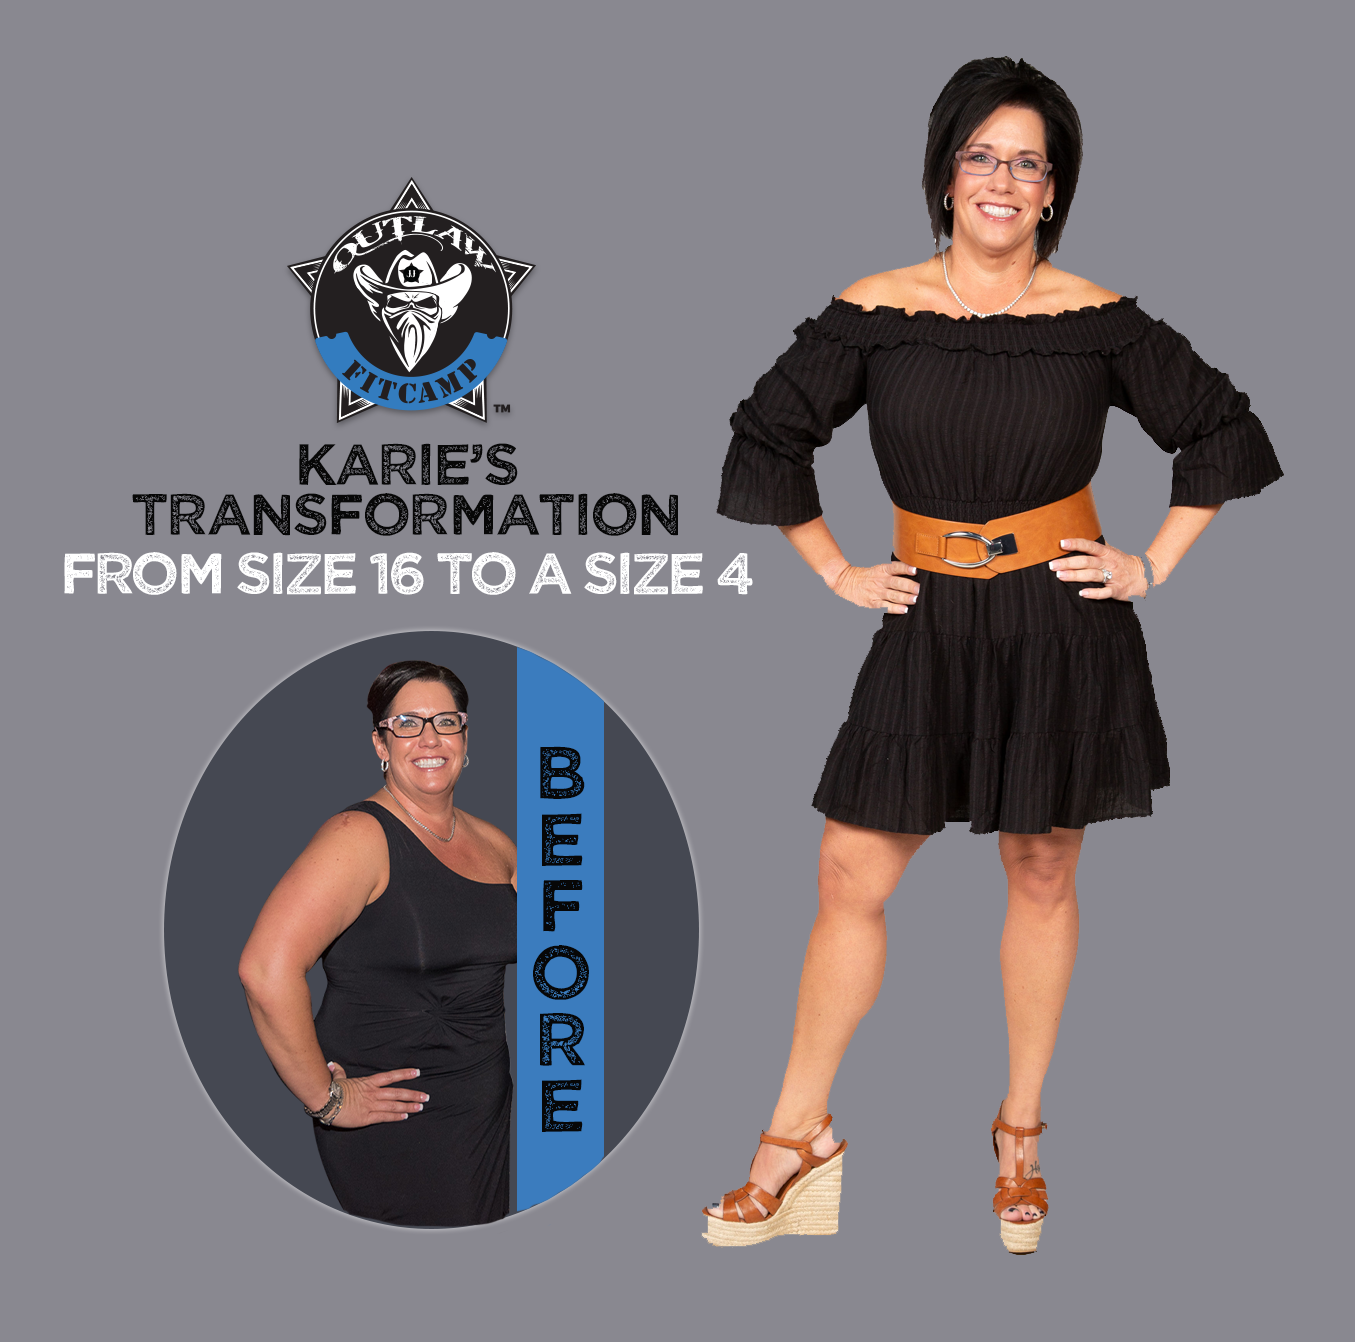 Karie Holcomb’s Incredible Transformation!